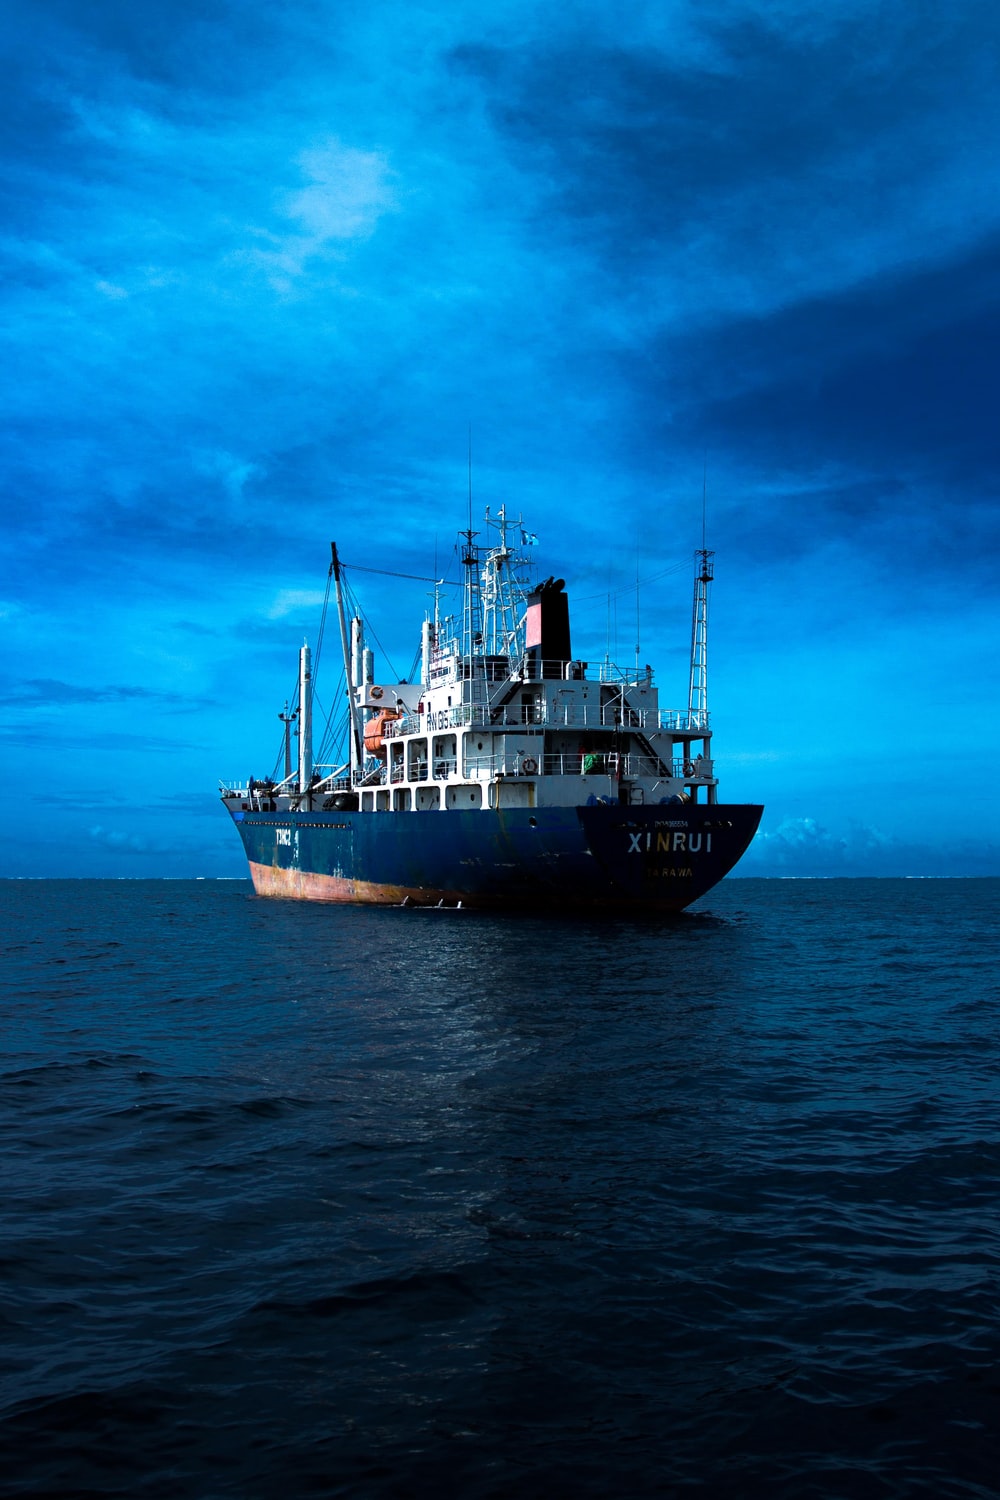 Fishing Ship Picture. Download Free Image